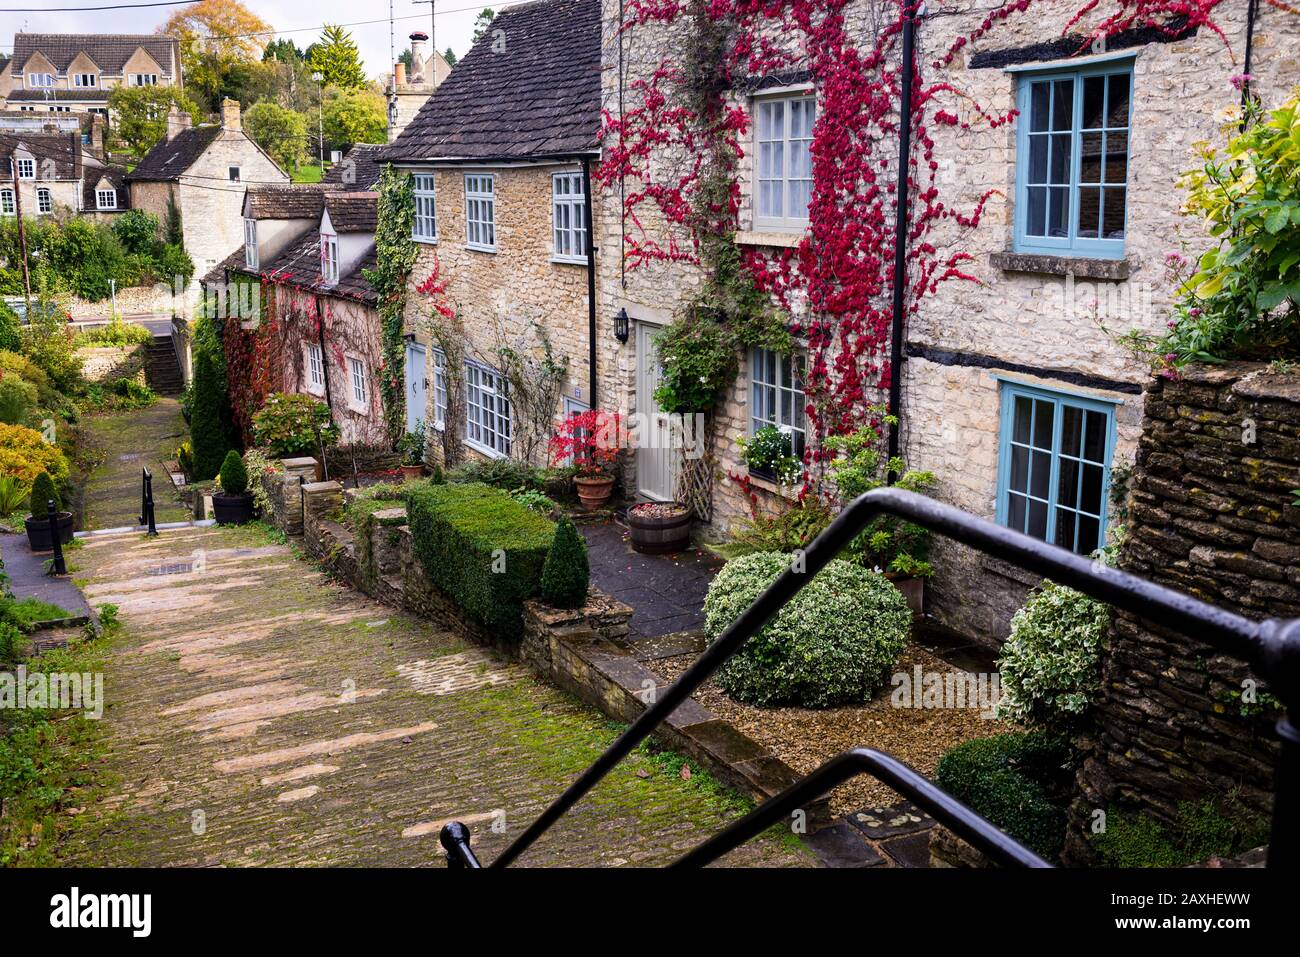 Chipping Steps in Tetbury, England, Cotswolds District. Stockfoto